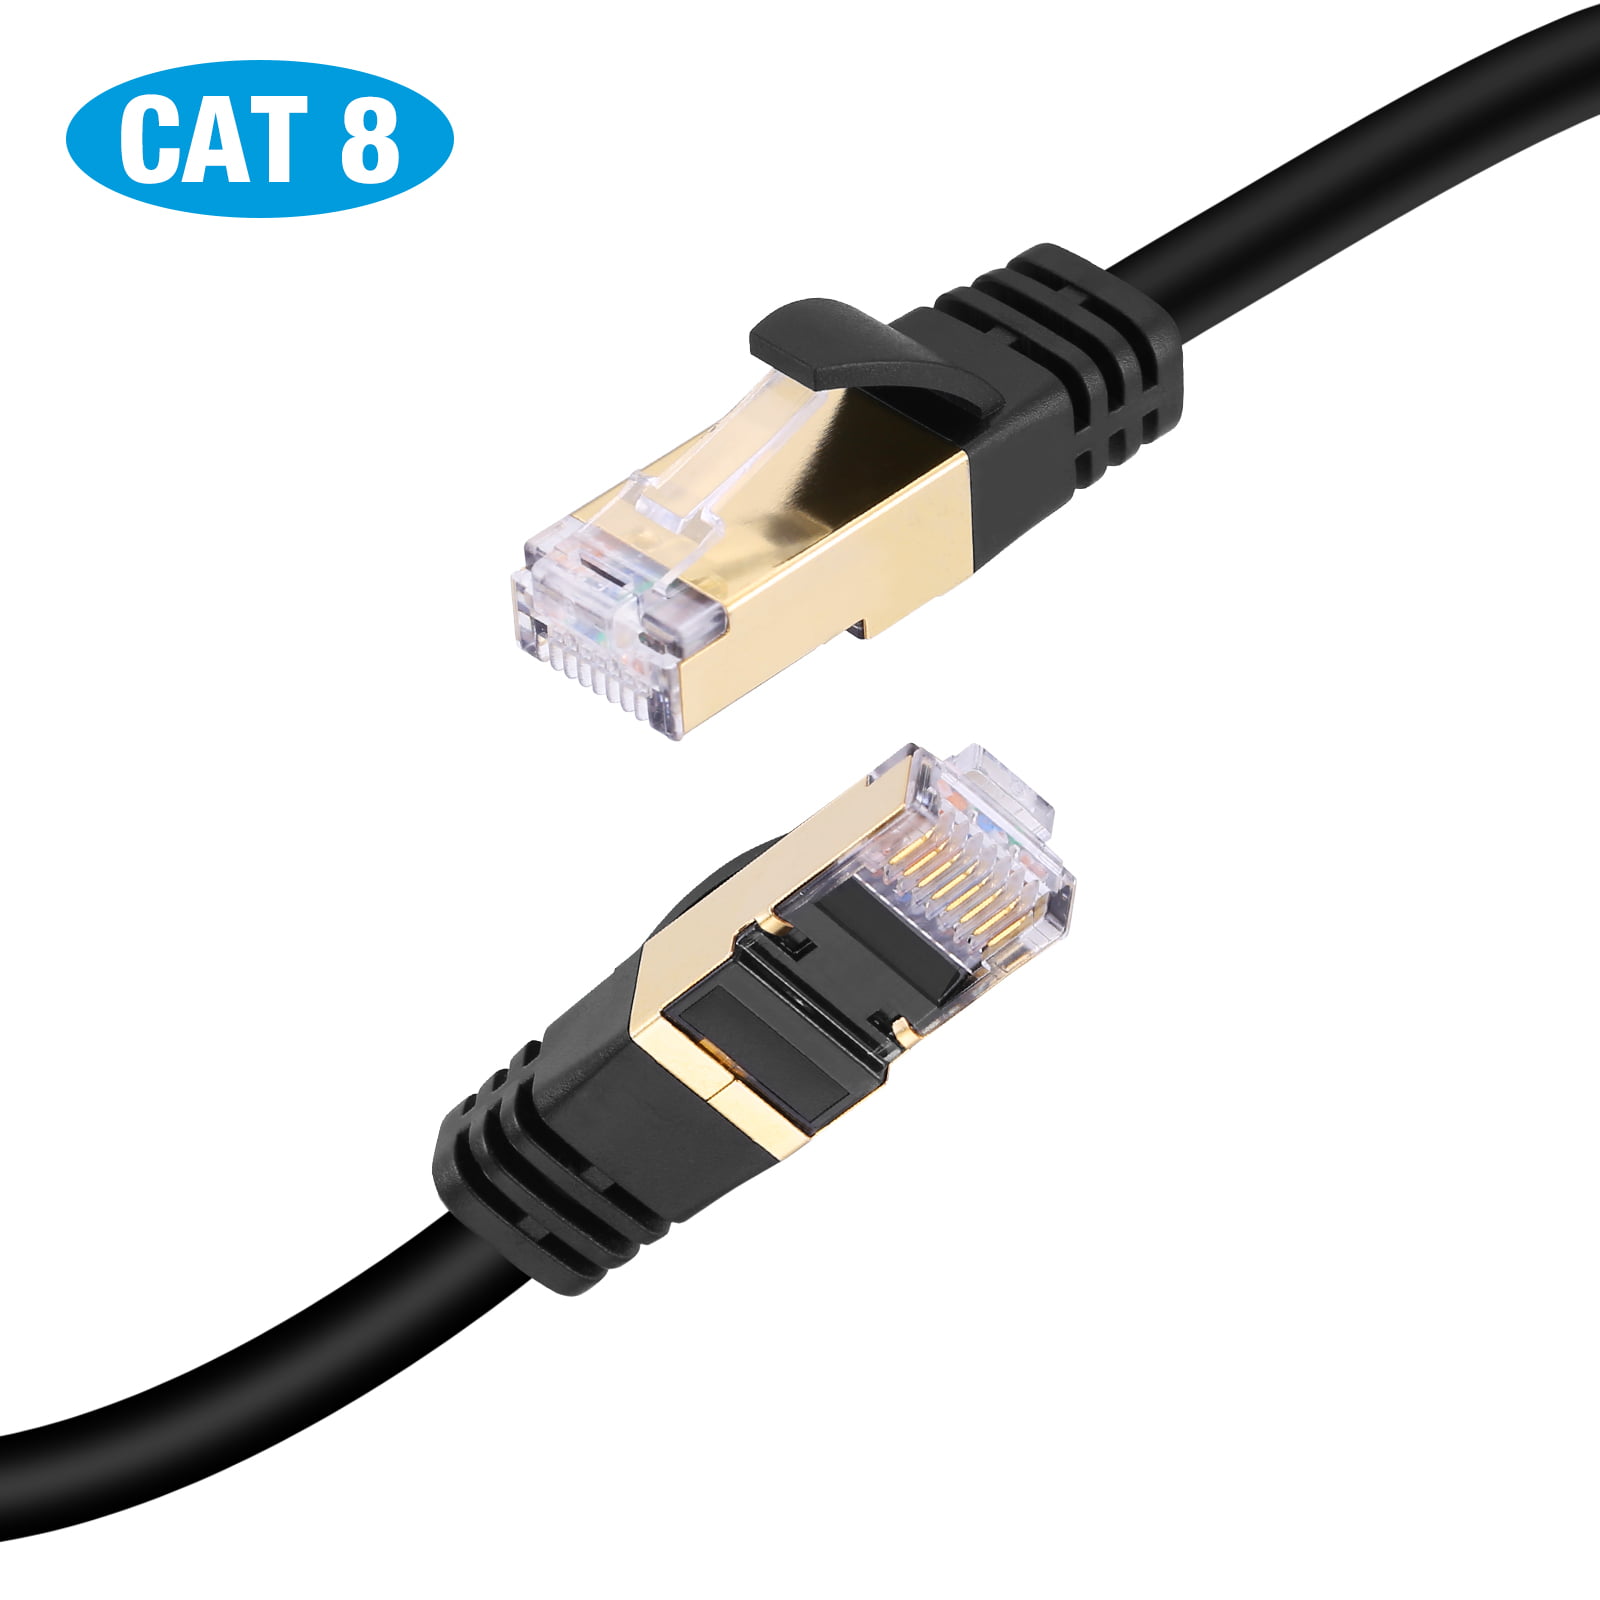 Outdoor/Indoor-Use LAN Wire Shielded Cat 8 Cat7 Cable Gold Plated RJ45 Connector 